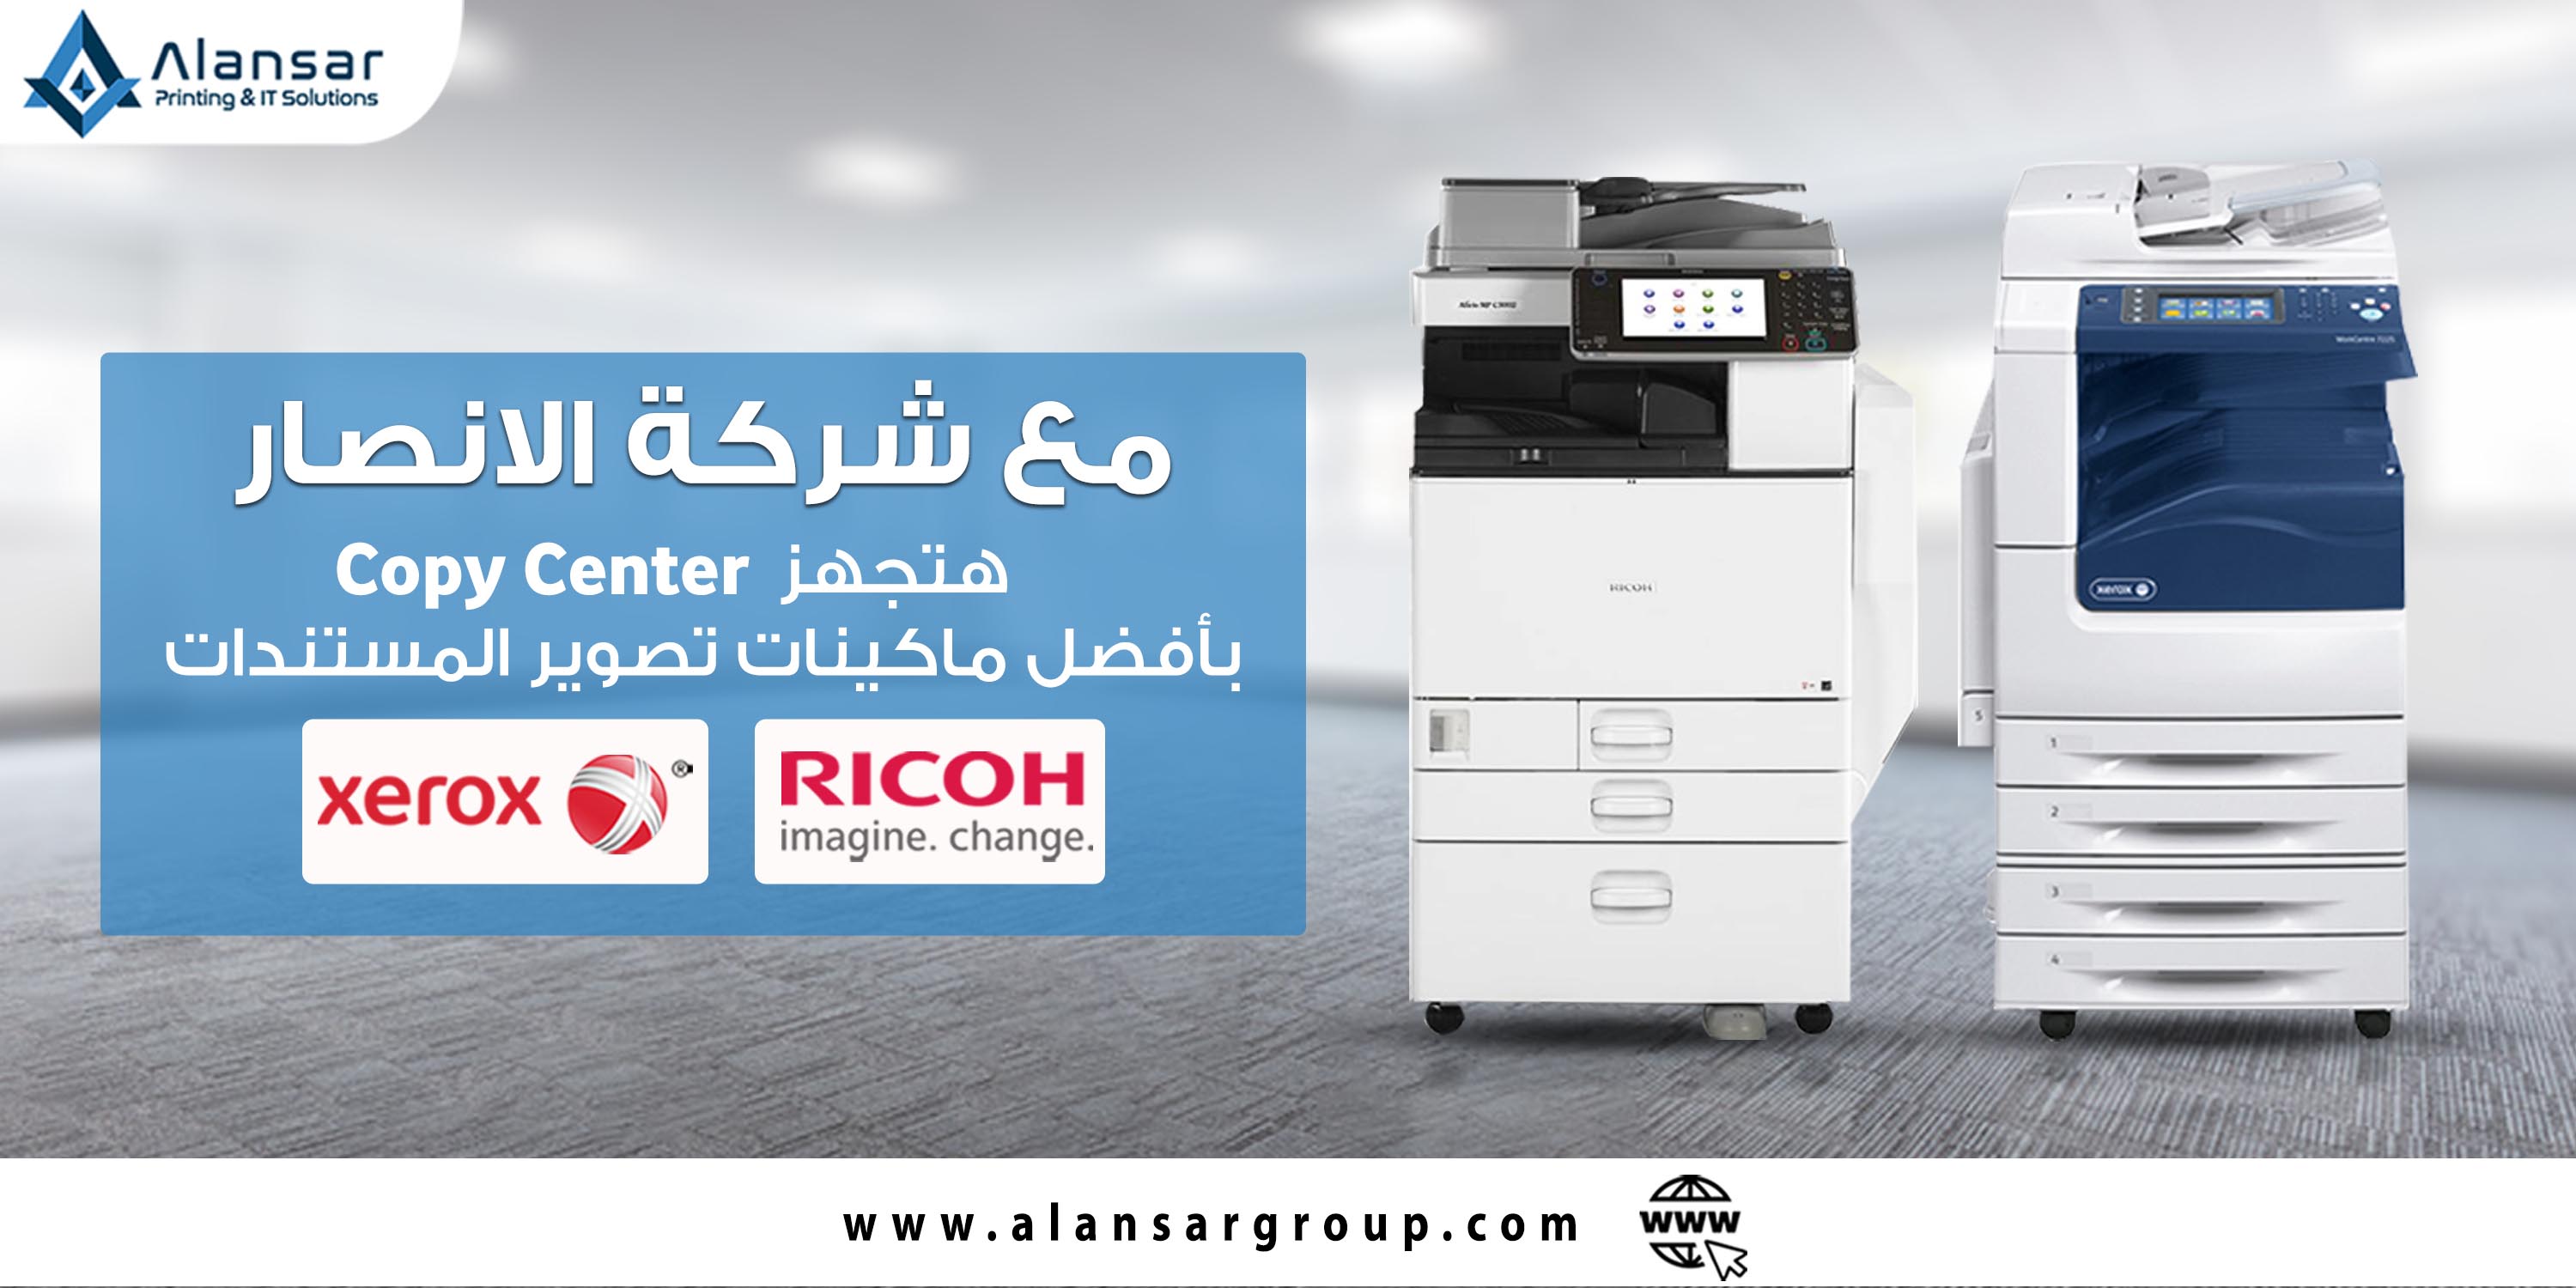 The role of photocopiers in equipping  the Copy Center